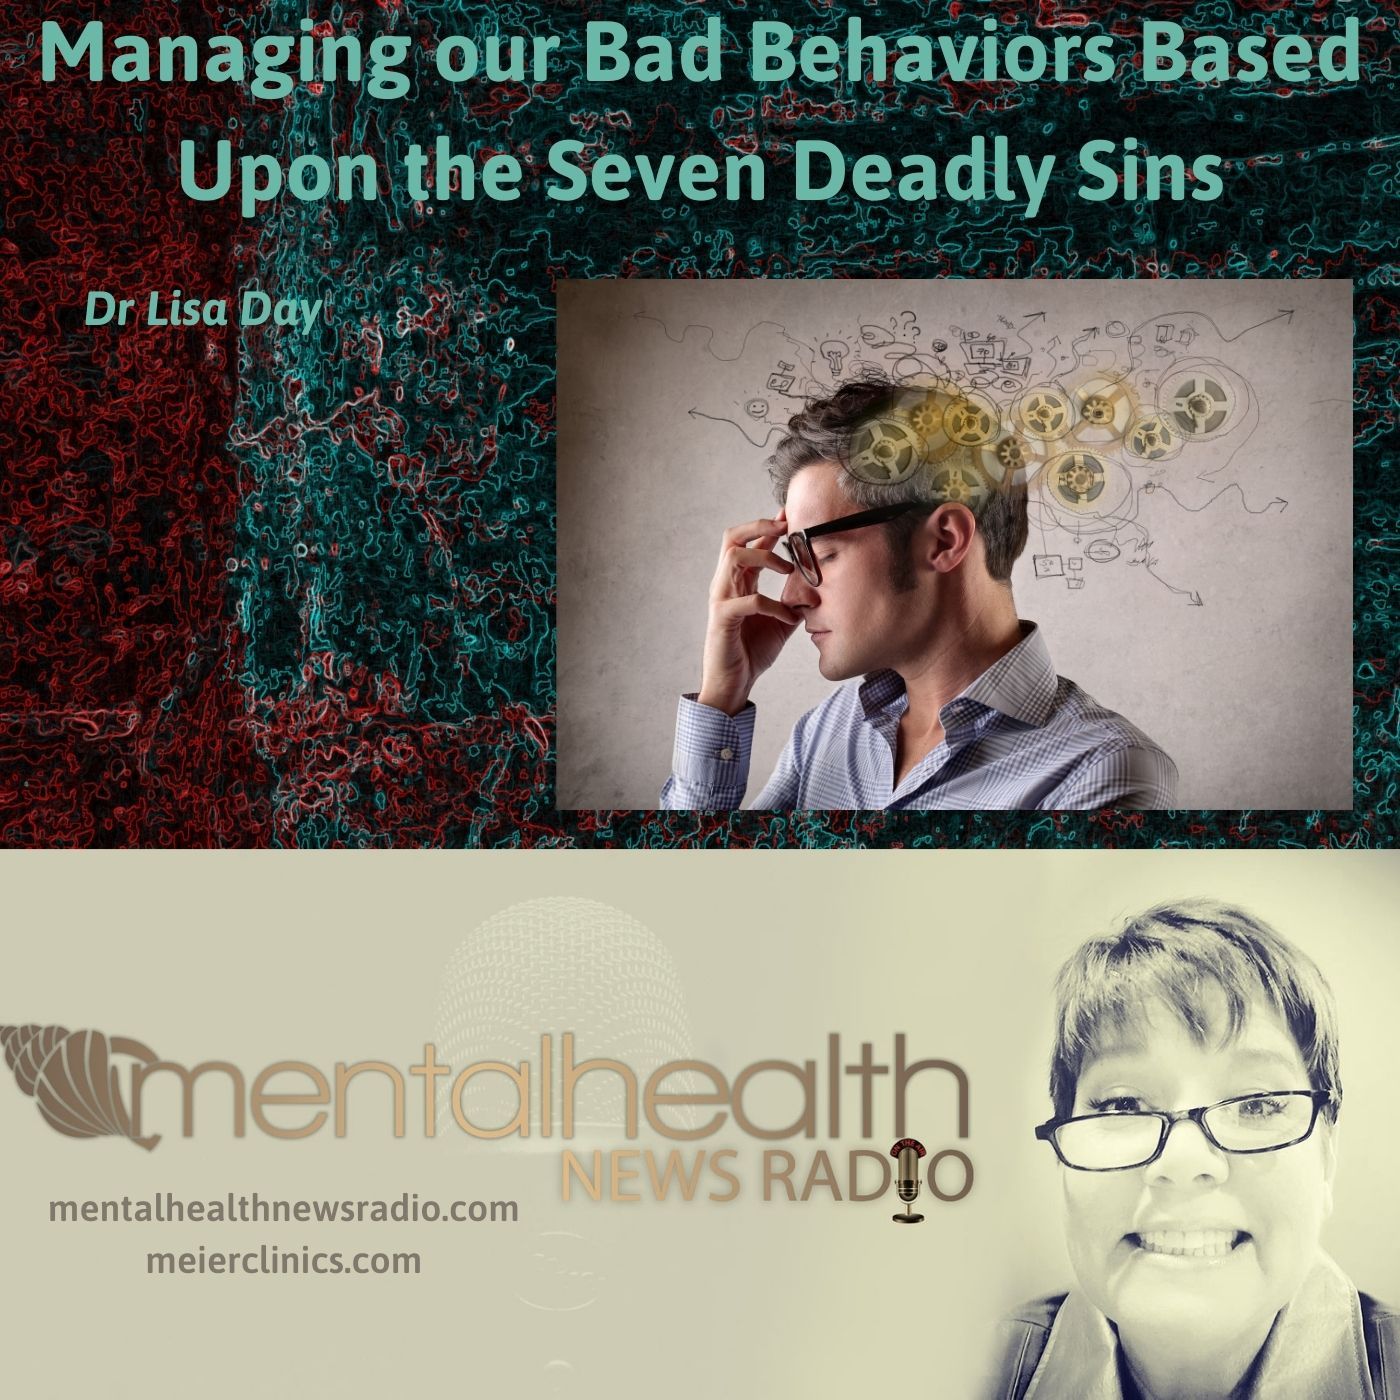 Mental Health News Radio - Managing our Bad Behaviors Based Upon the Seven Deadly Sins